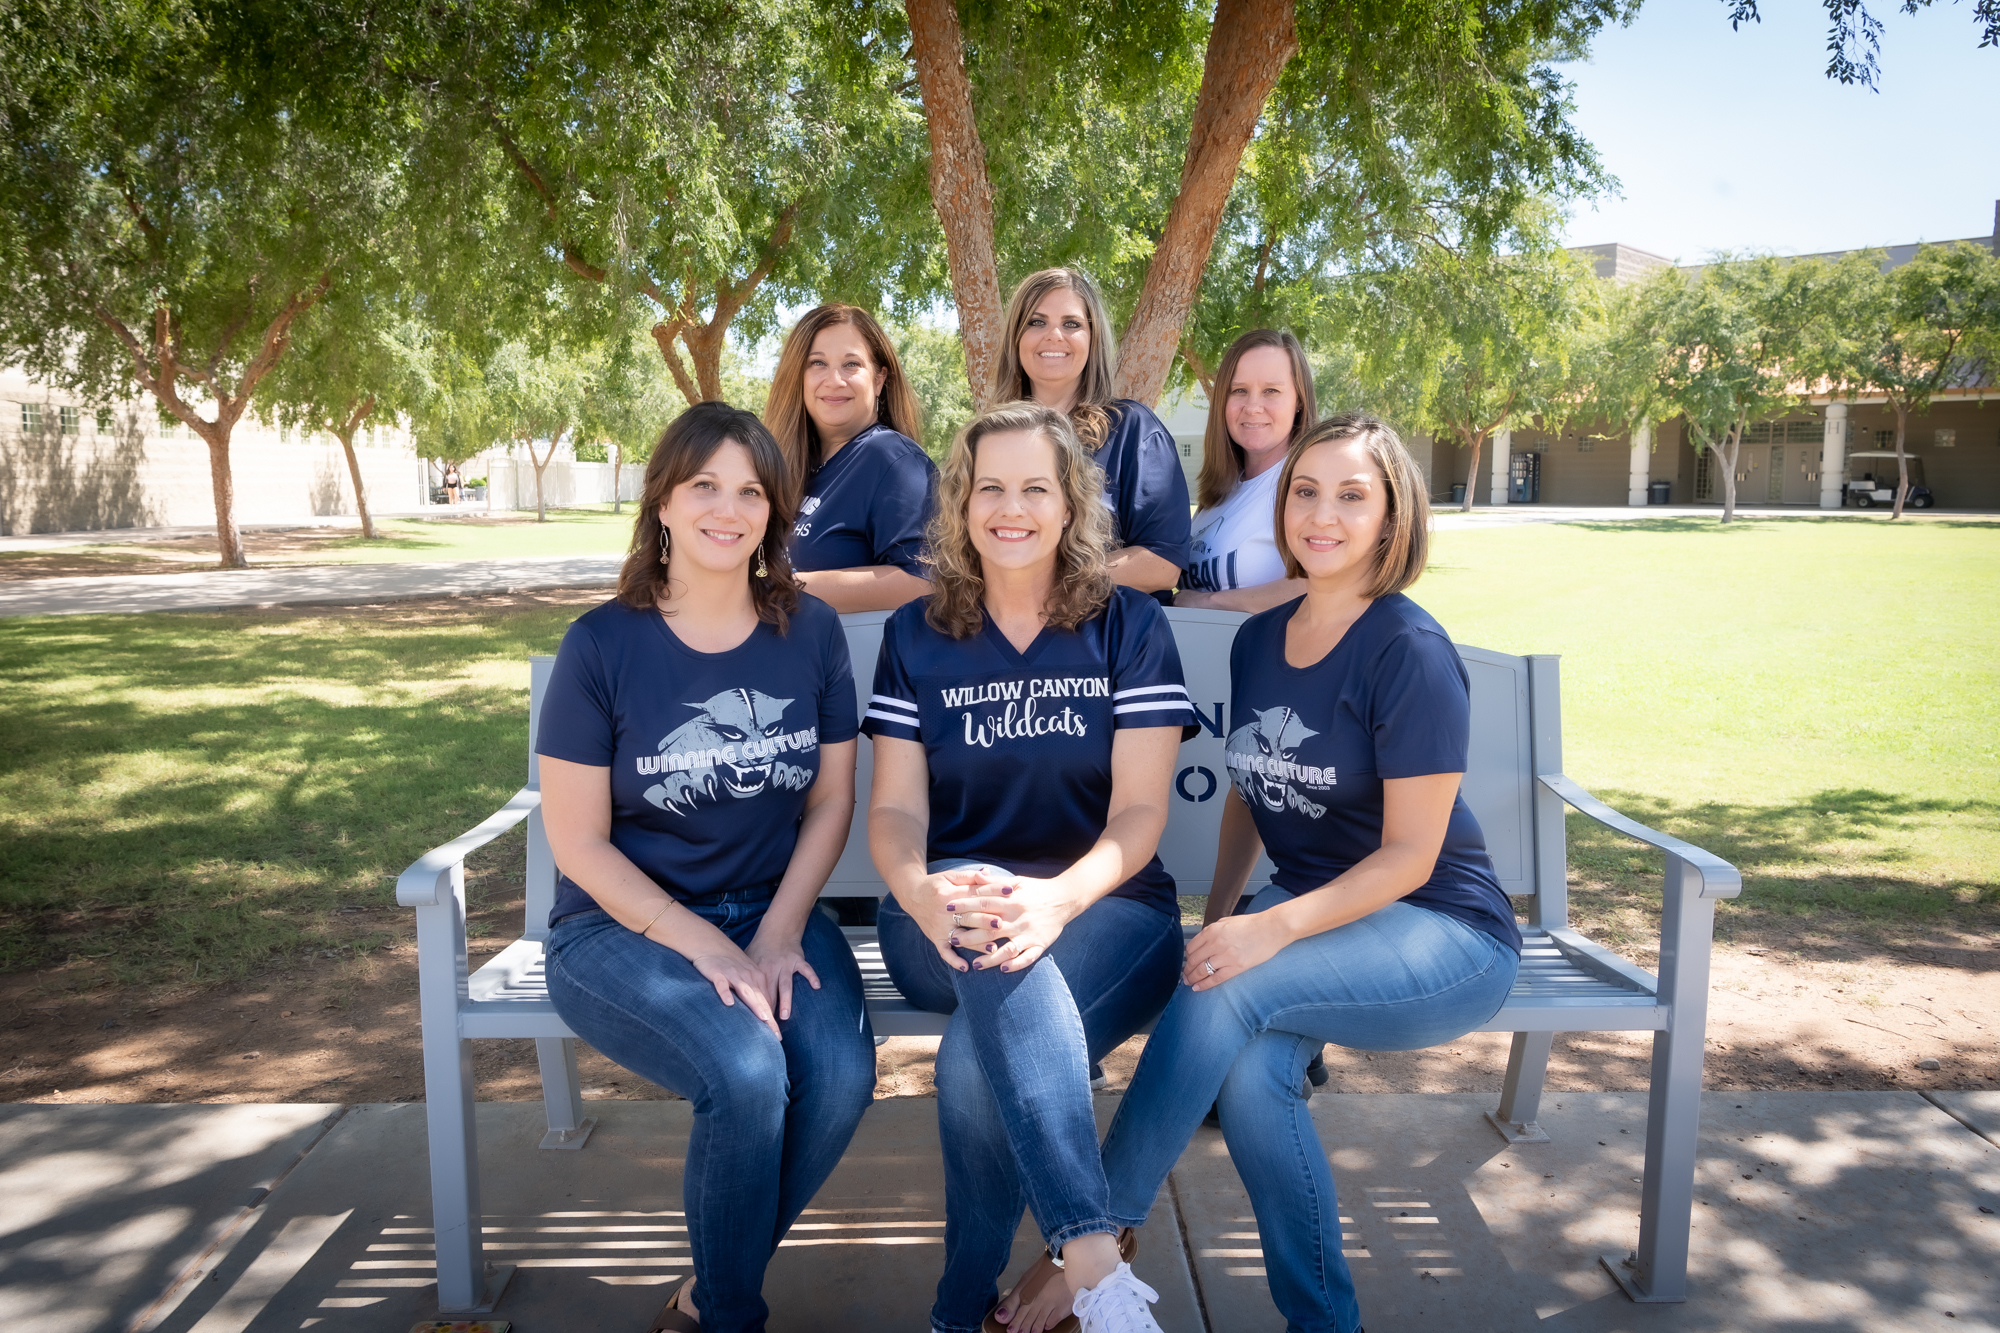 Willow Canyon Counselors posing for photo on campus